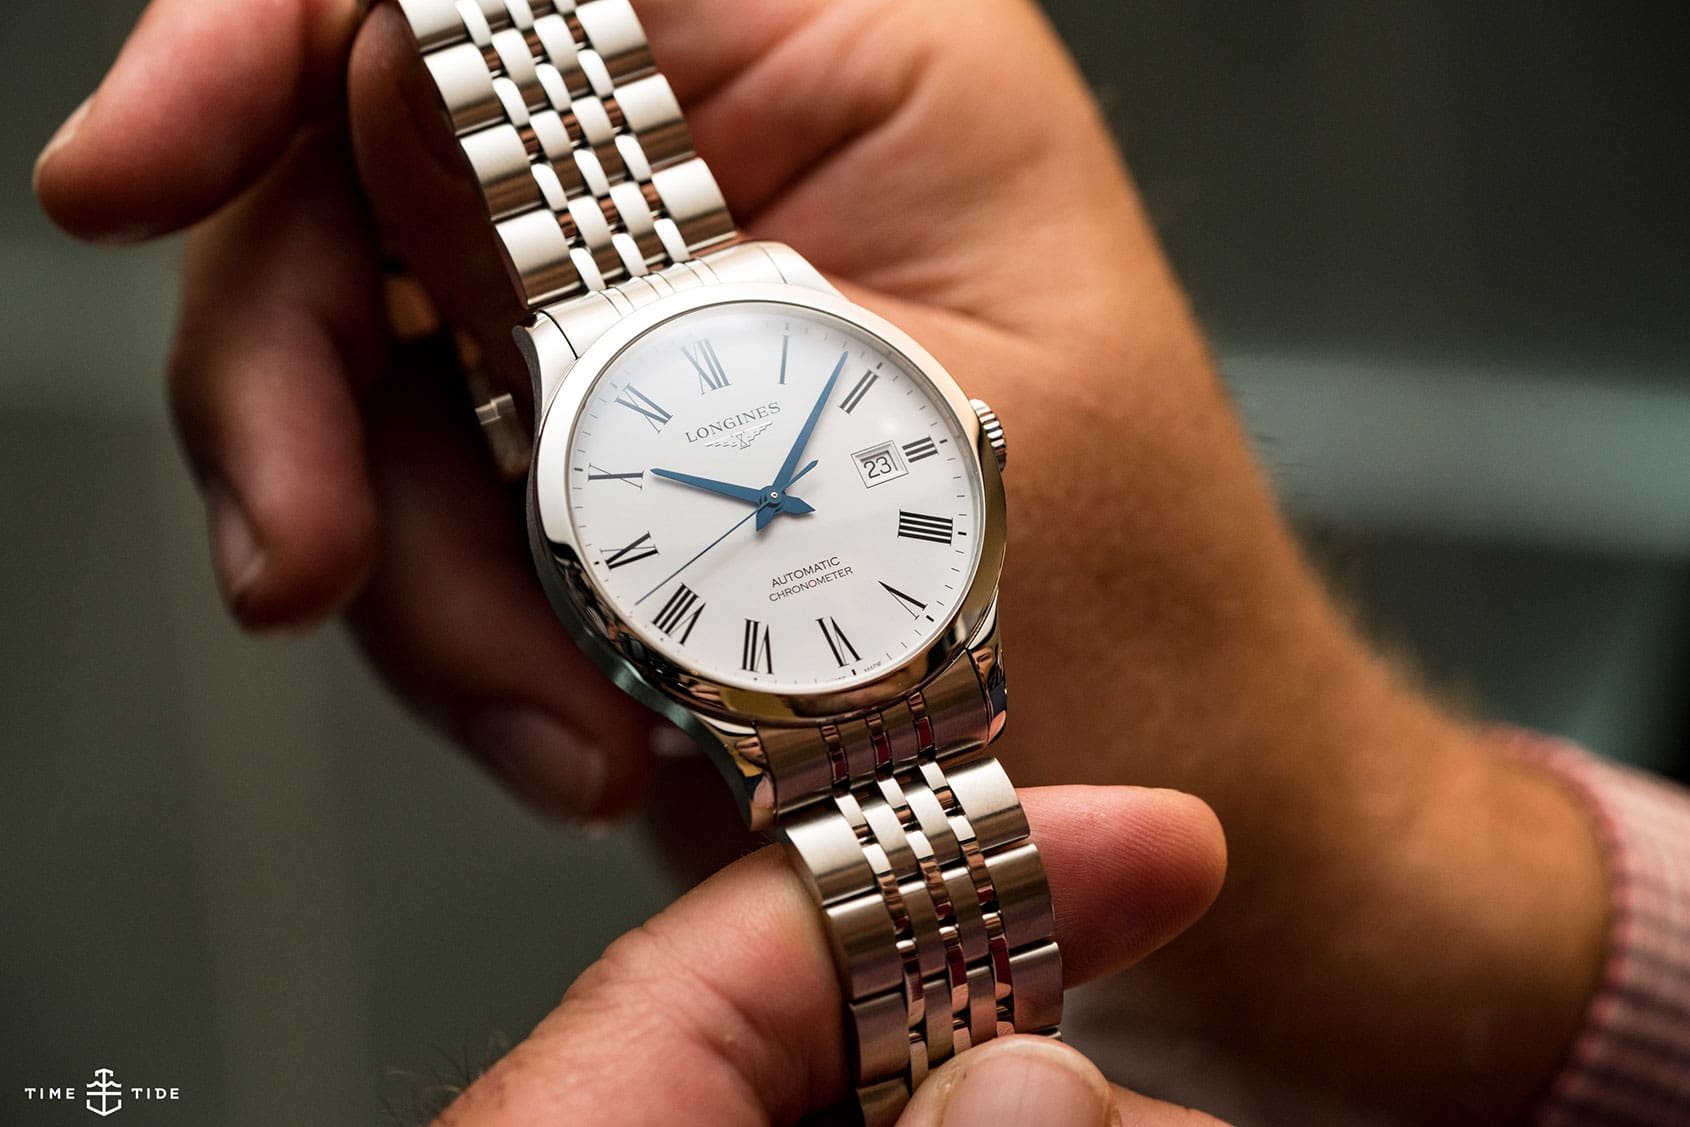 HANDS-ON: One simple word that makes the Longines Record a big deal